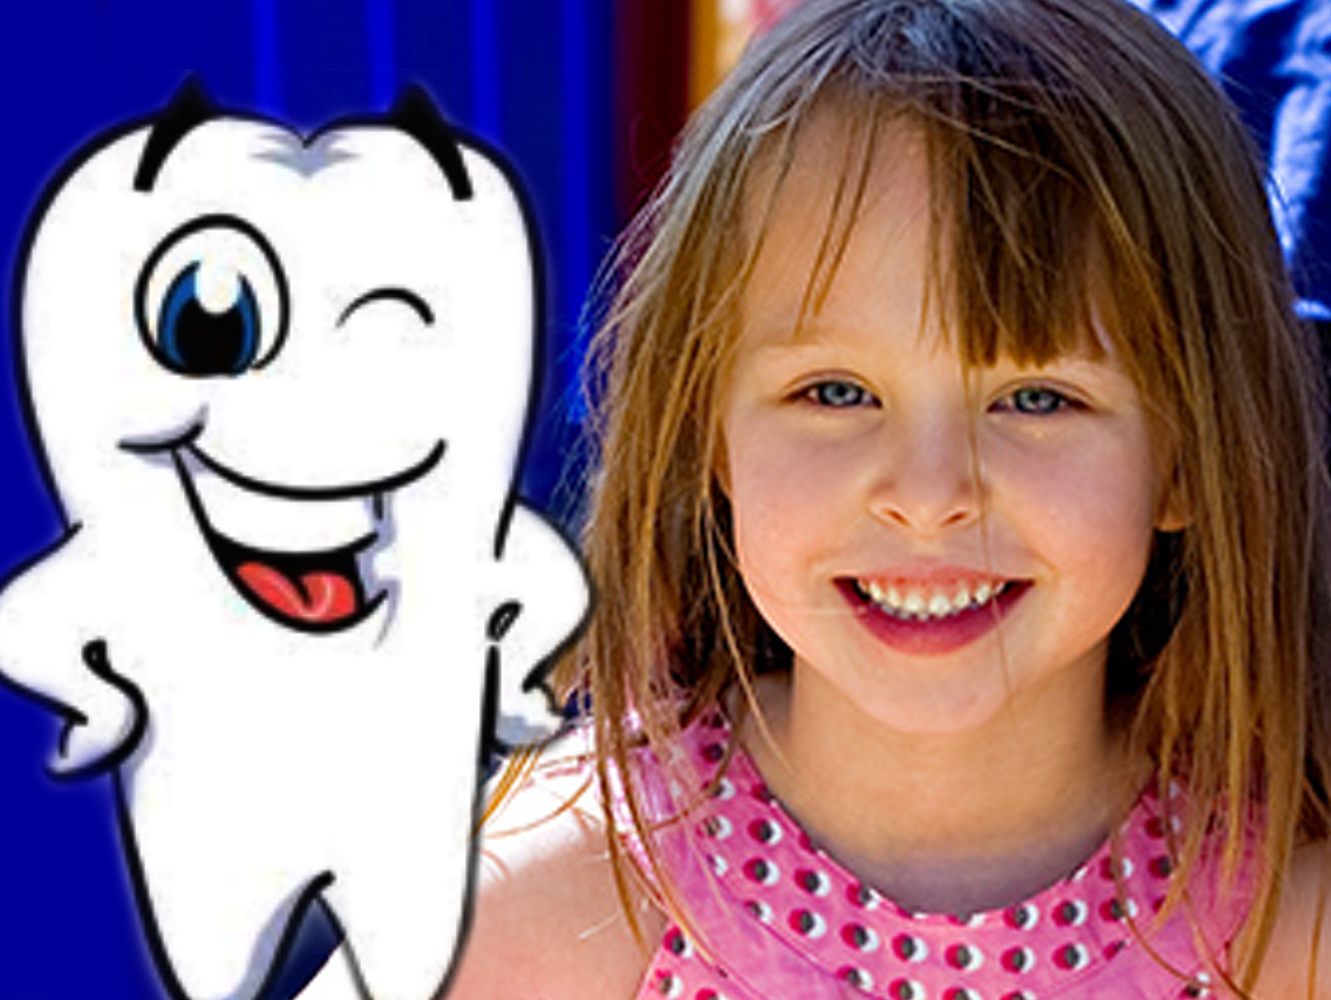 Free Teeth Cleaning for Kids, February 6th at the Dental Hygiene Clinic